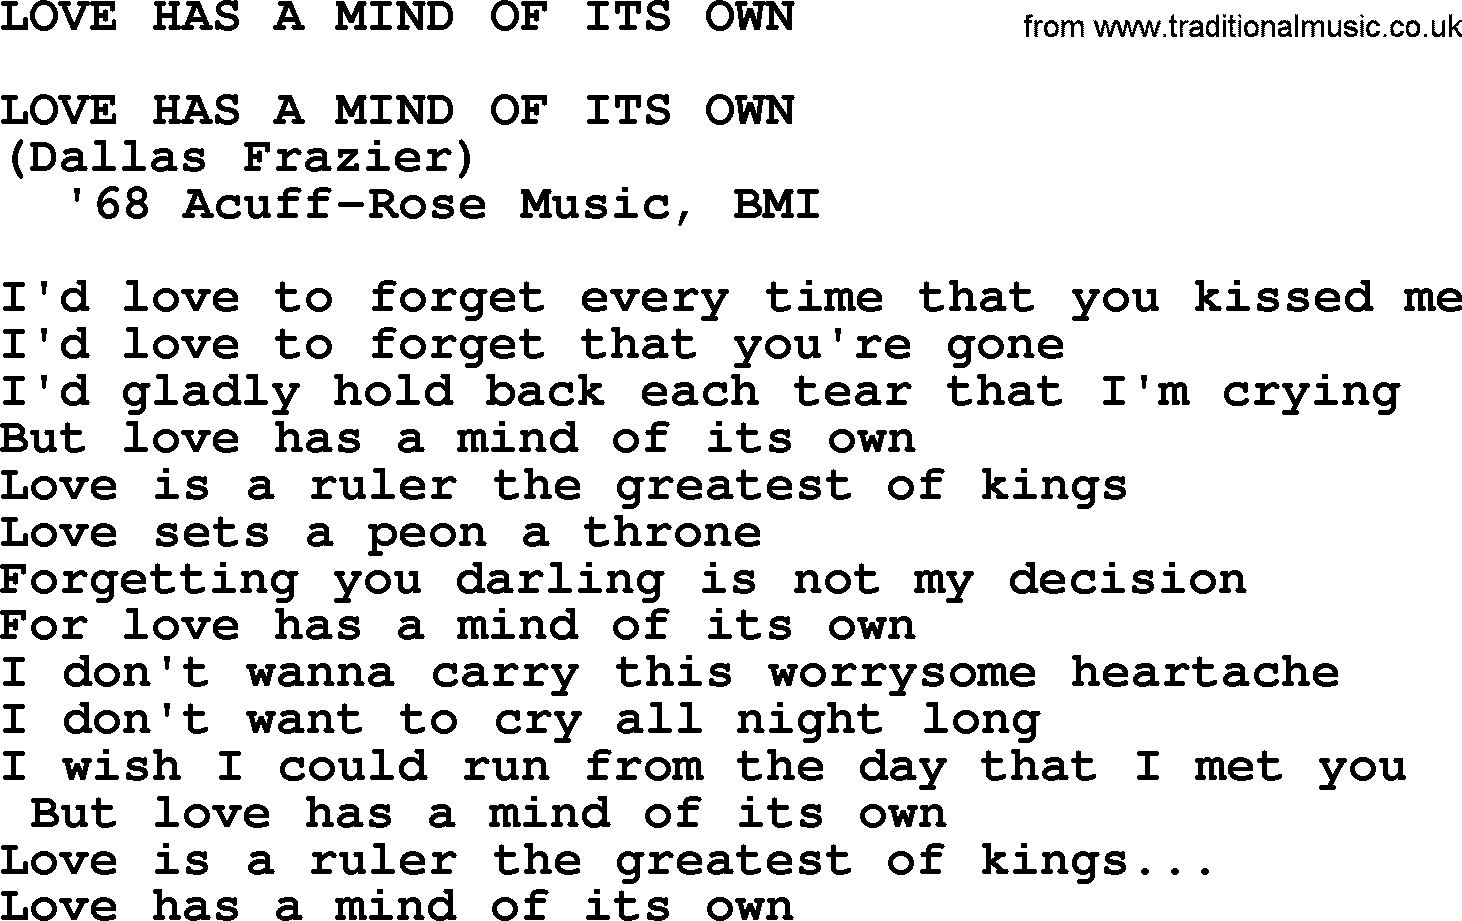 Merle Haggard song: Love Has A Mind Of Its Own, lyrics.